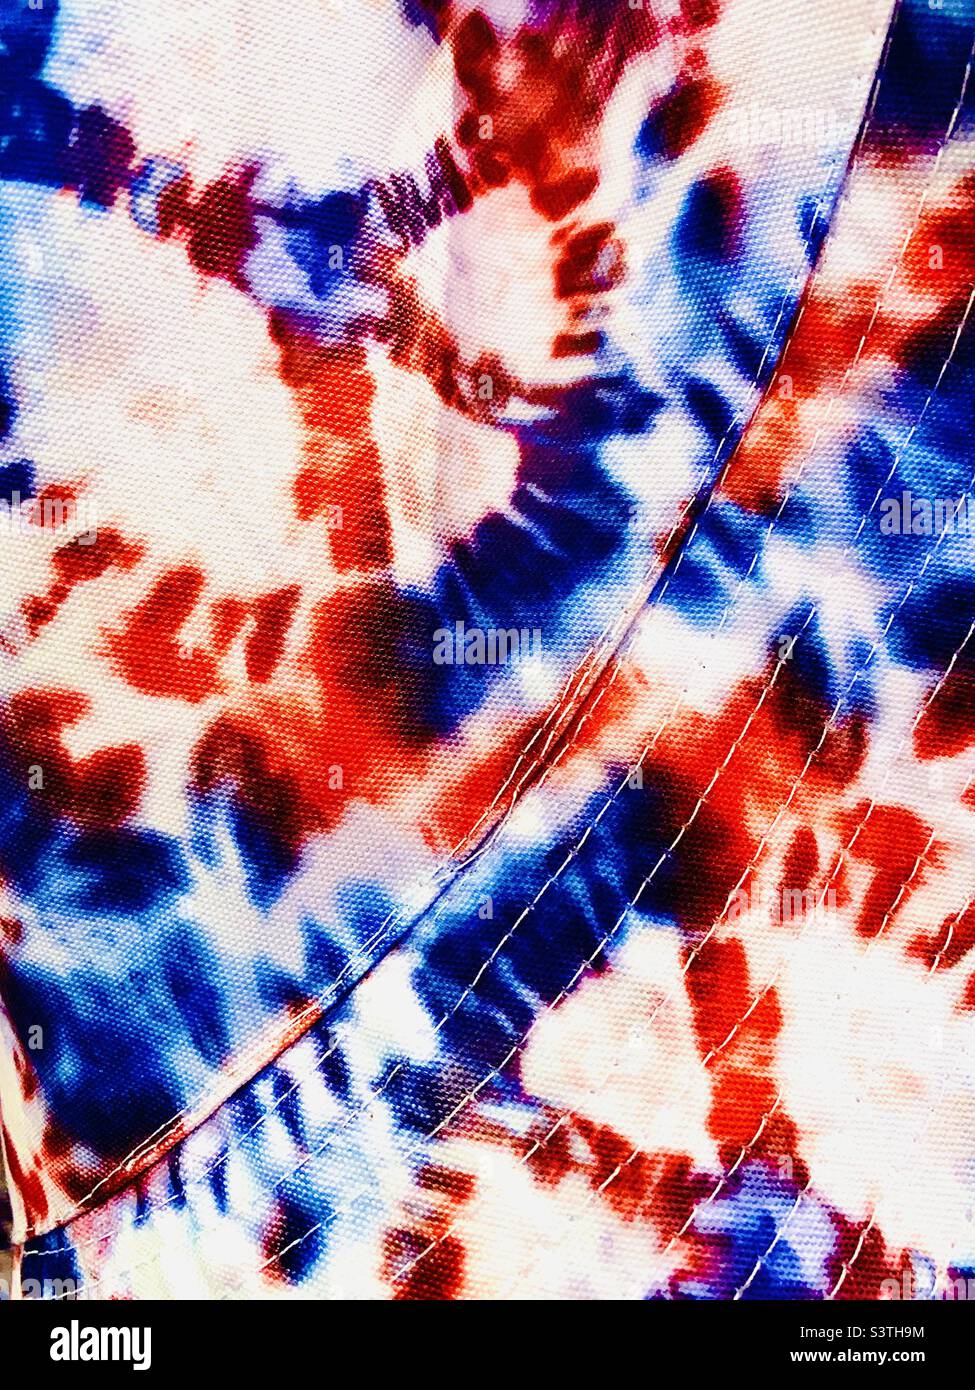 Red, white, and blue tie dyed peace sign fabric Stock Photo